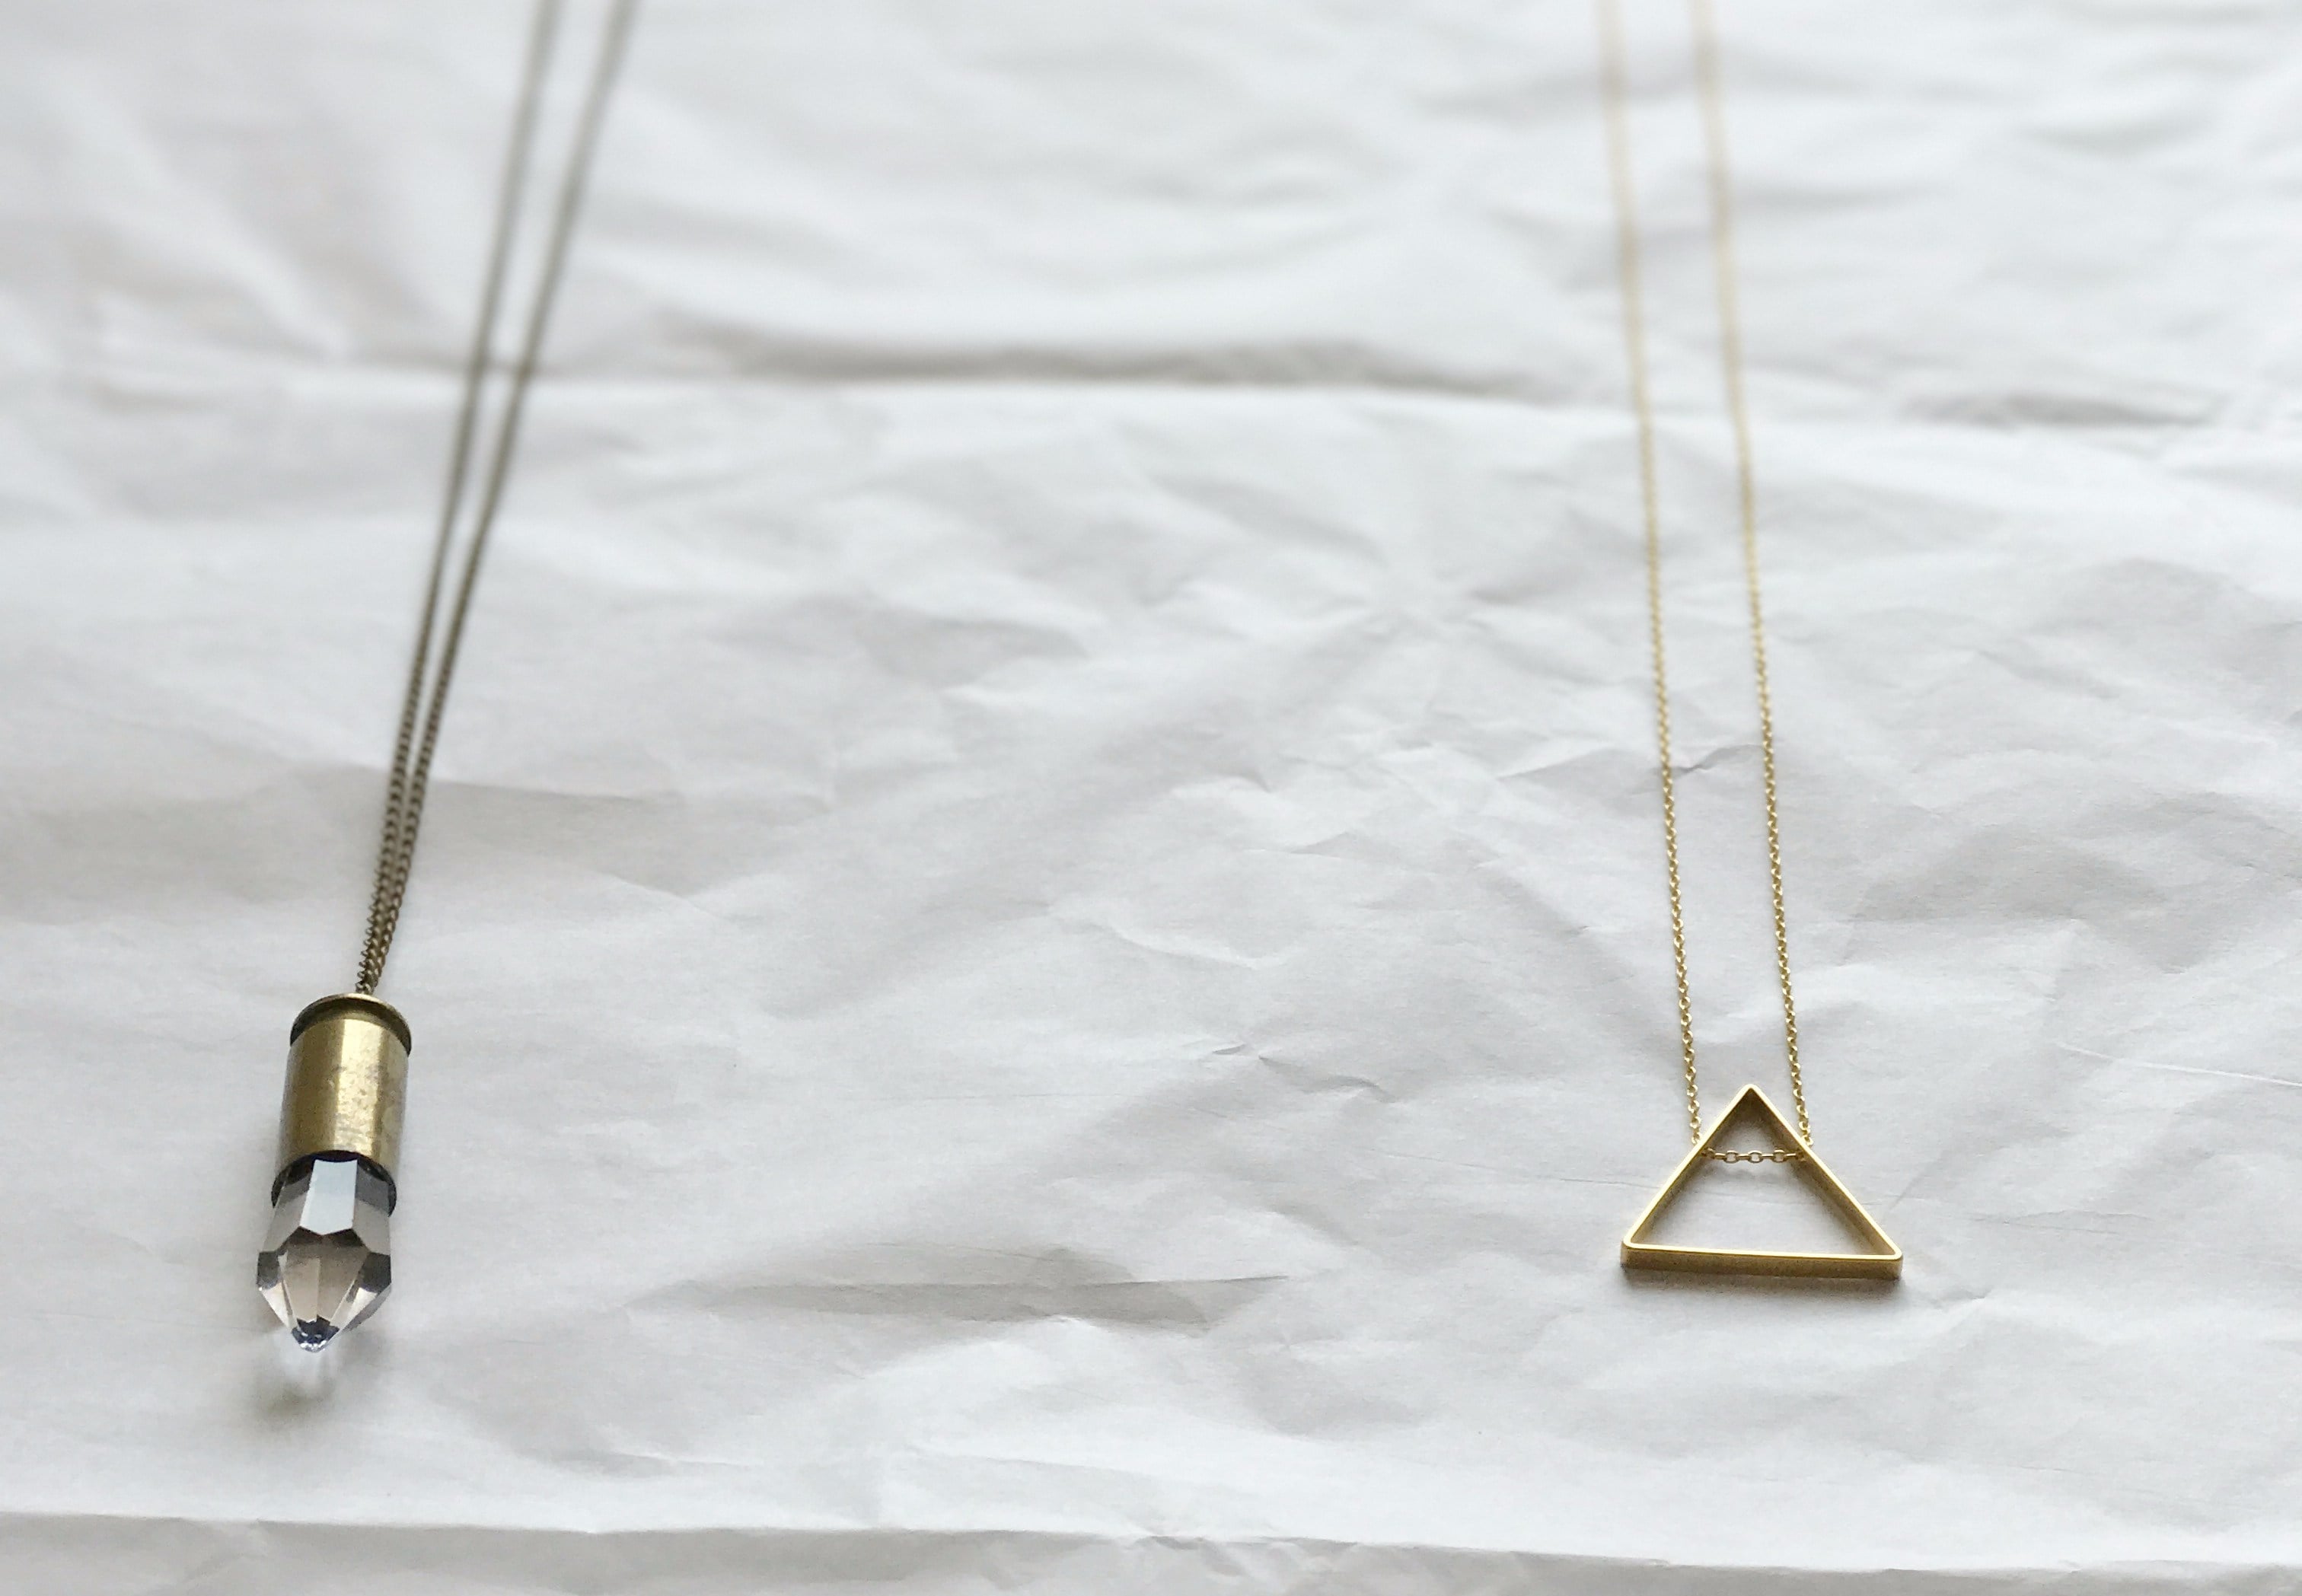 Keep Your Necklaces From Tangling! : 4 Steps - Instructables